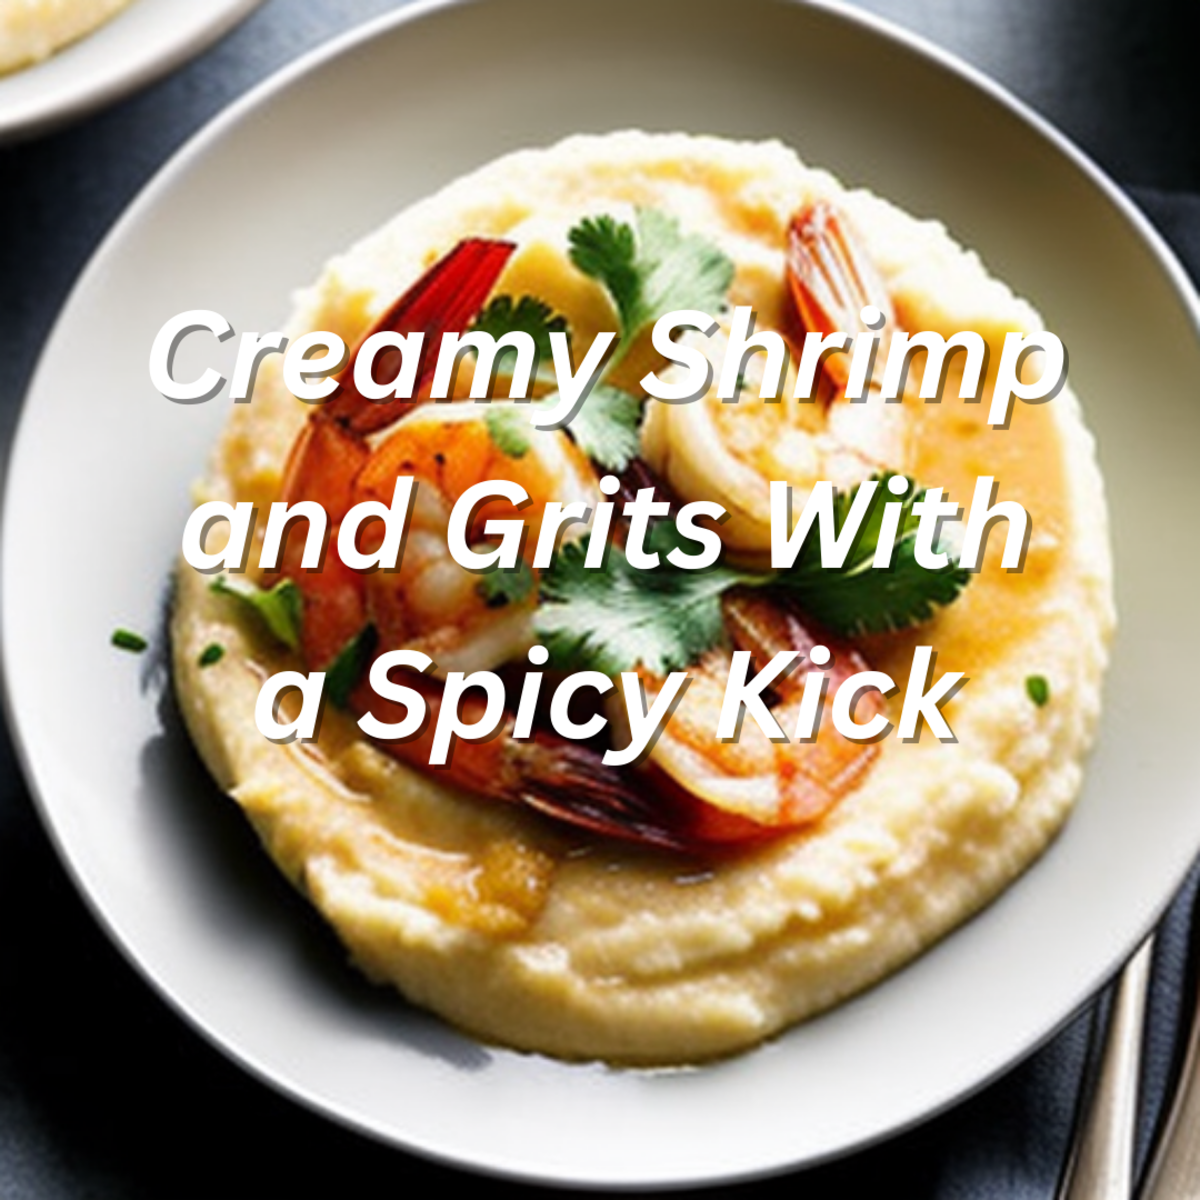 Creamy Shrimp and Grits With a Spicy Kick